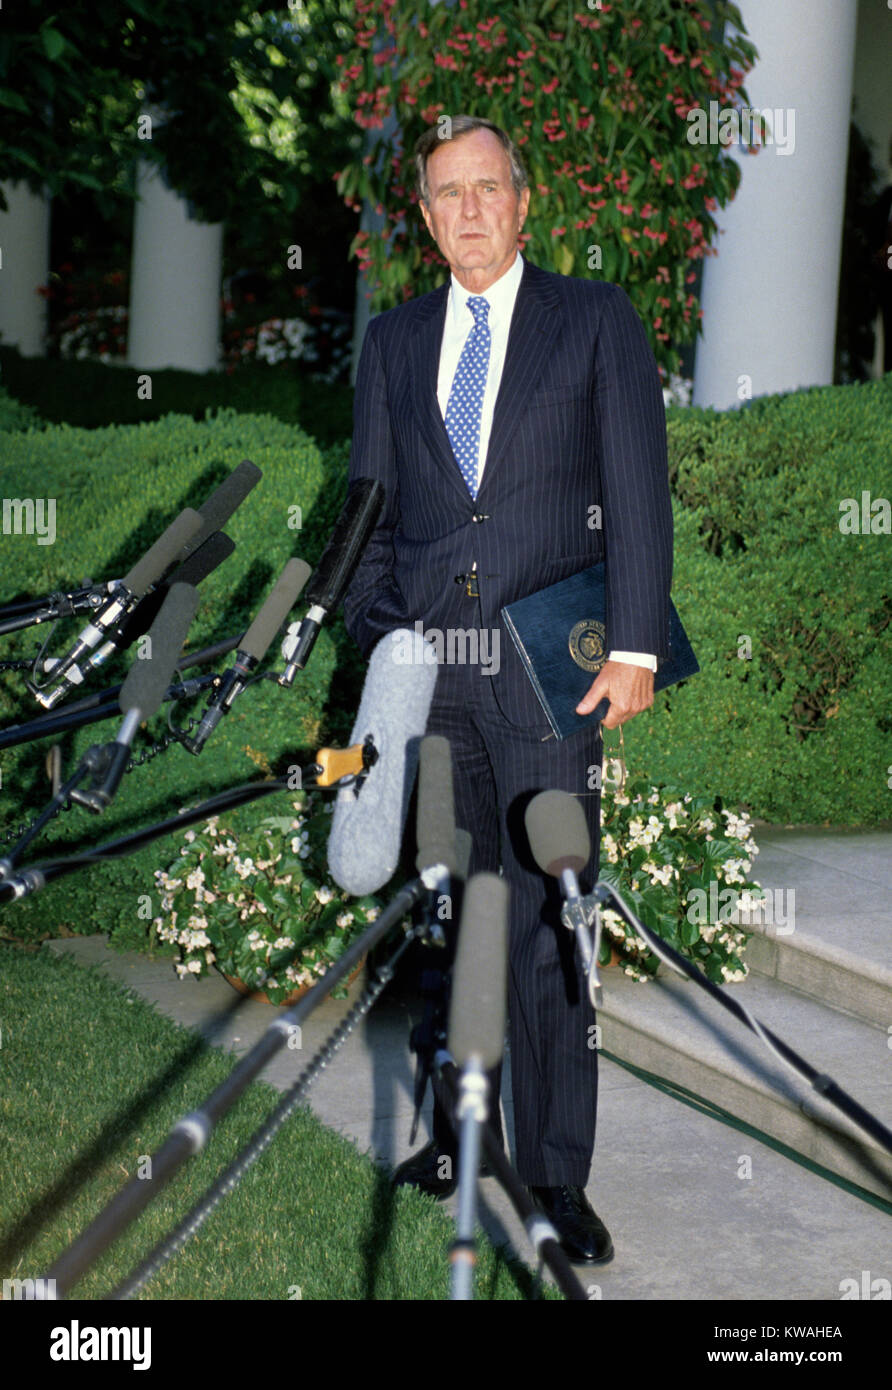 United States President George H.W. Bush holds a press conference in the Rose Garden of the White House in Washington, DC following his first day of summit talks with Soviet President Mikhail Gorbachev on May 31, 1990. Credit: Ron Sachs/CNP Photo via Credit: Newscom/Alamy Live News Stock Photo